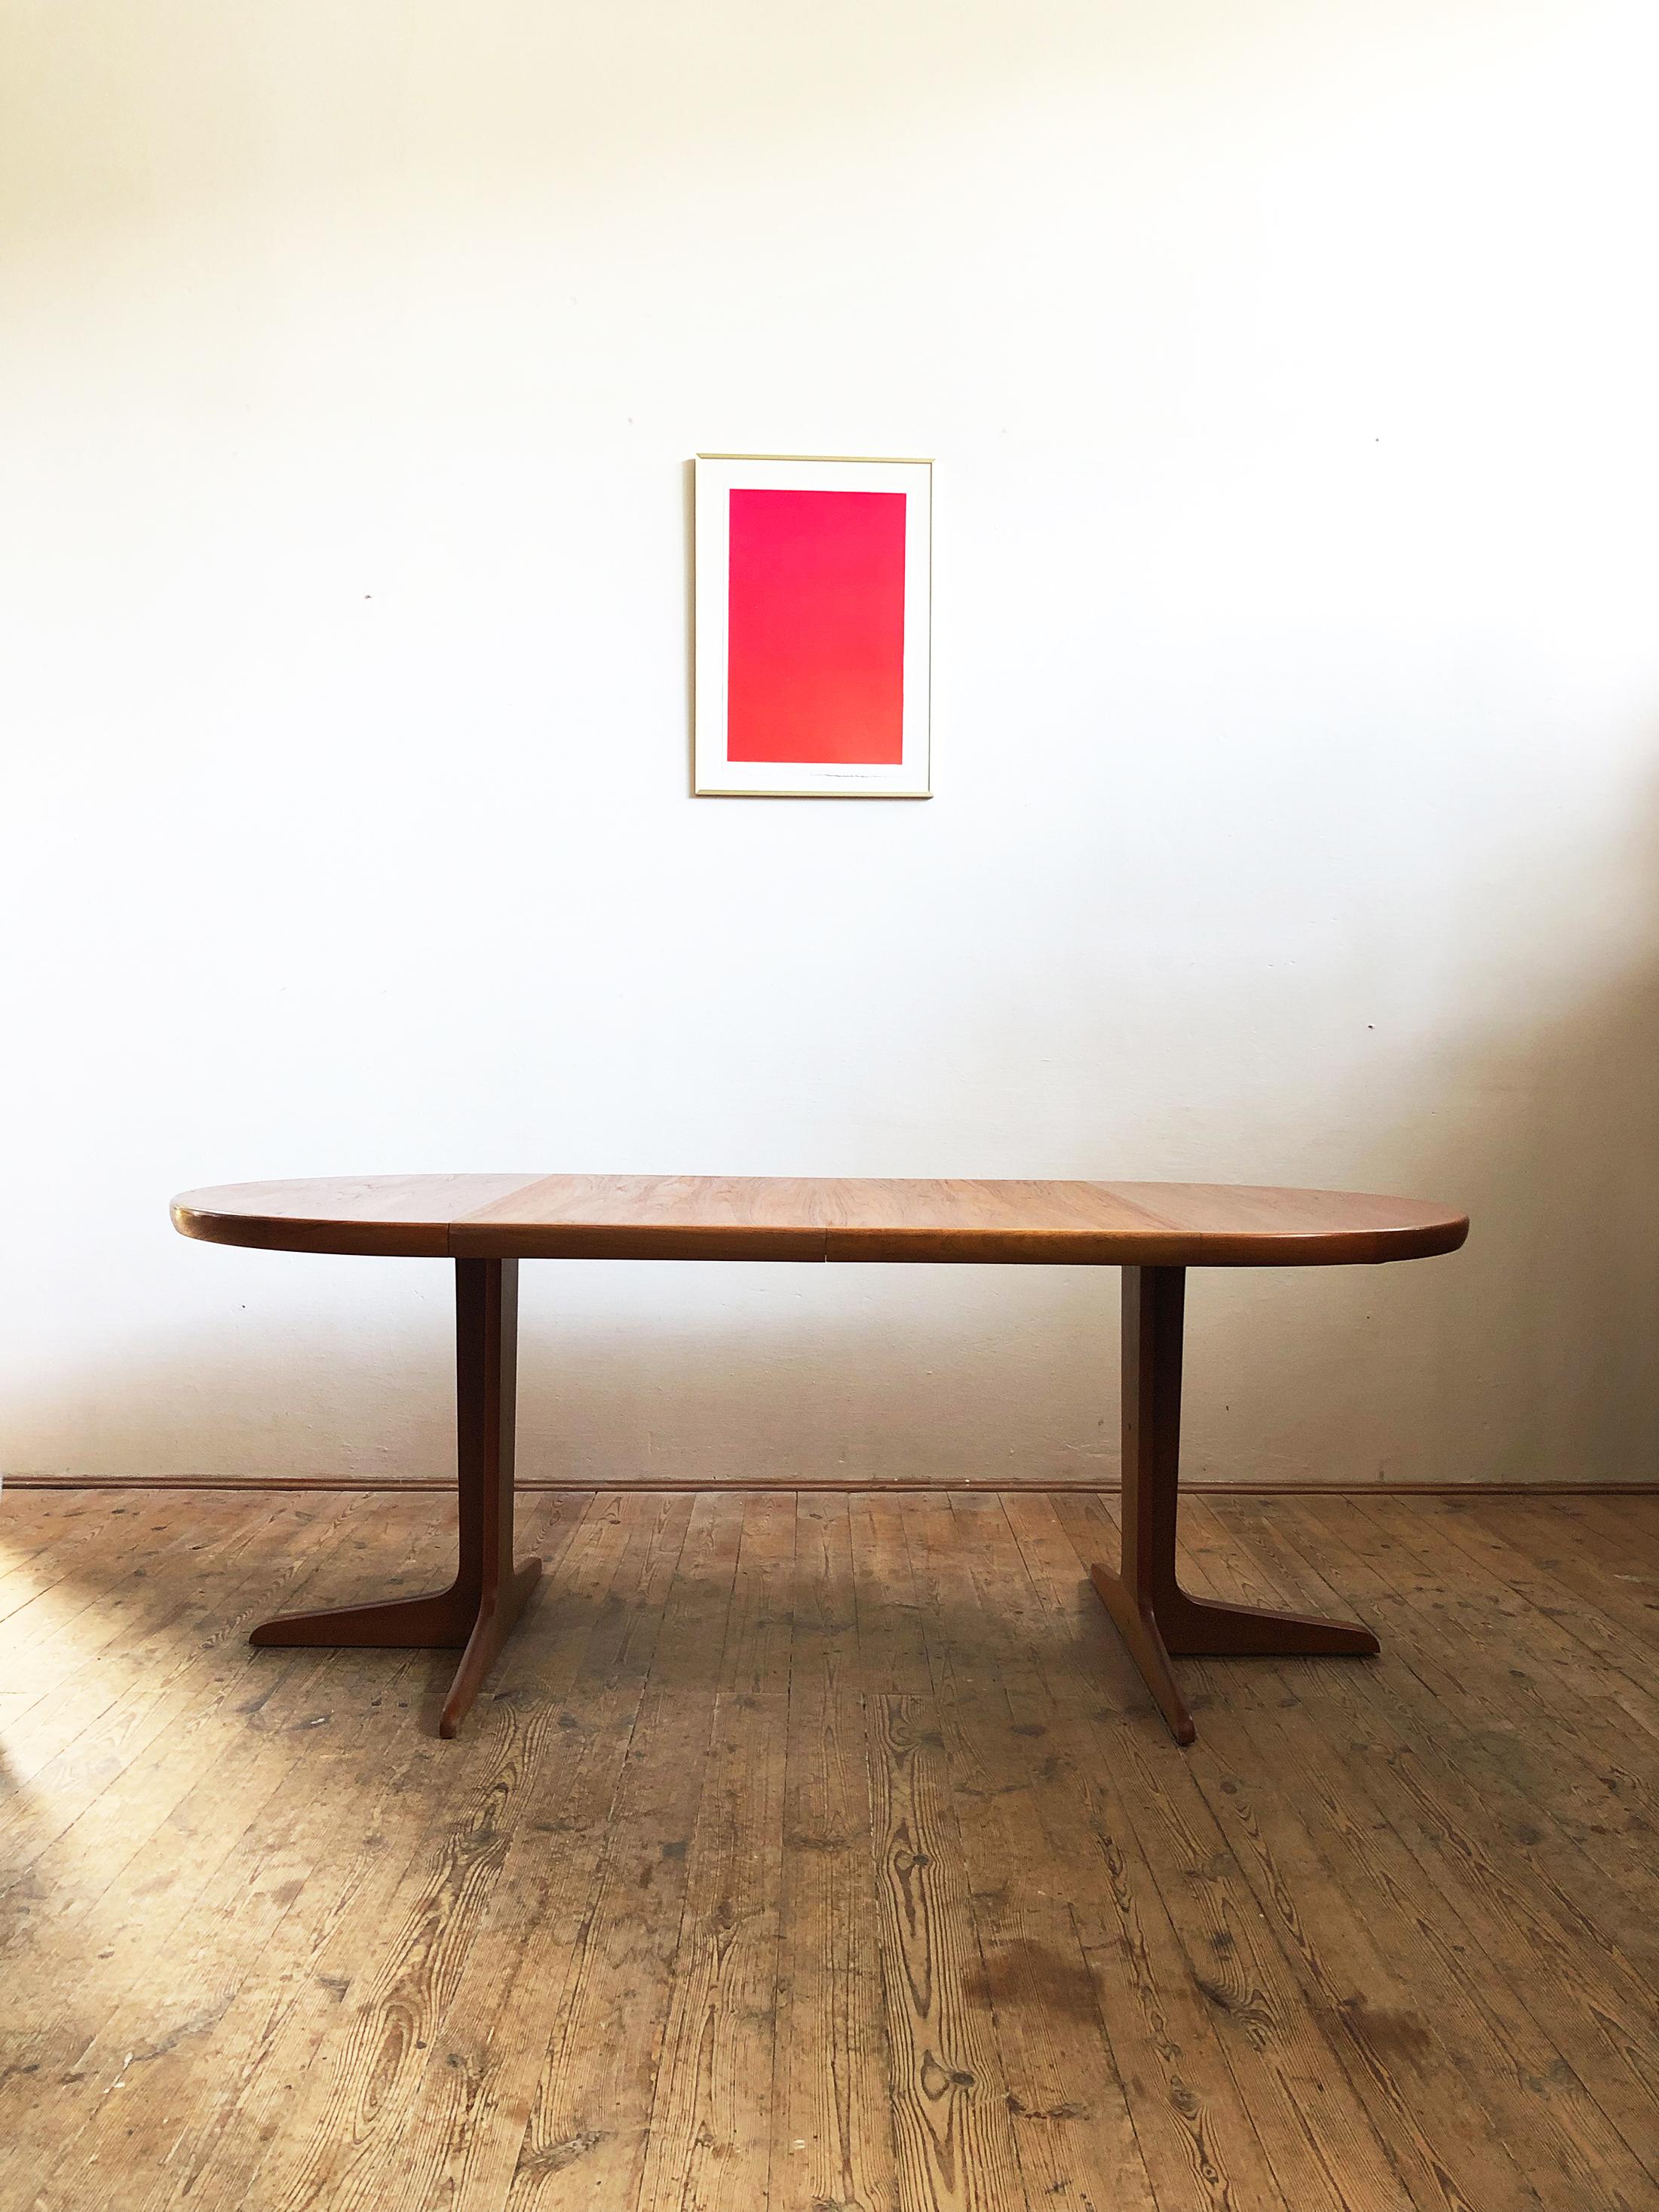 Danish Mid-Century Modern Extendable Teak Dining Table by Spøttrup, 1960s In Good Condition For Sale In Munich, Bavaria